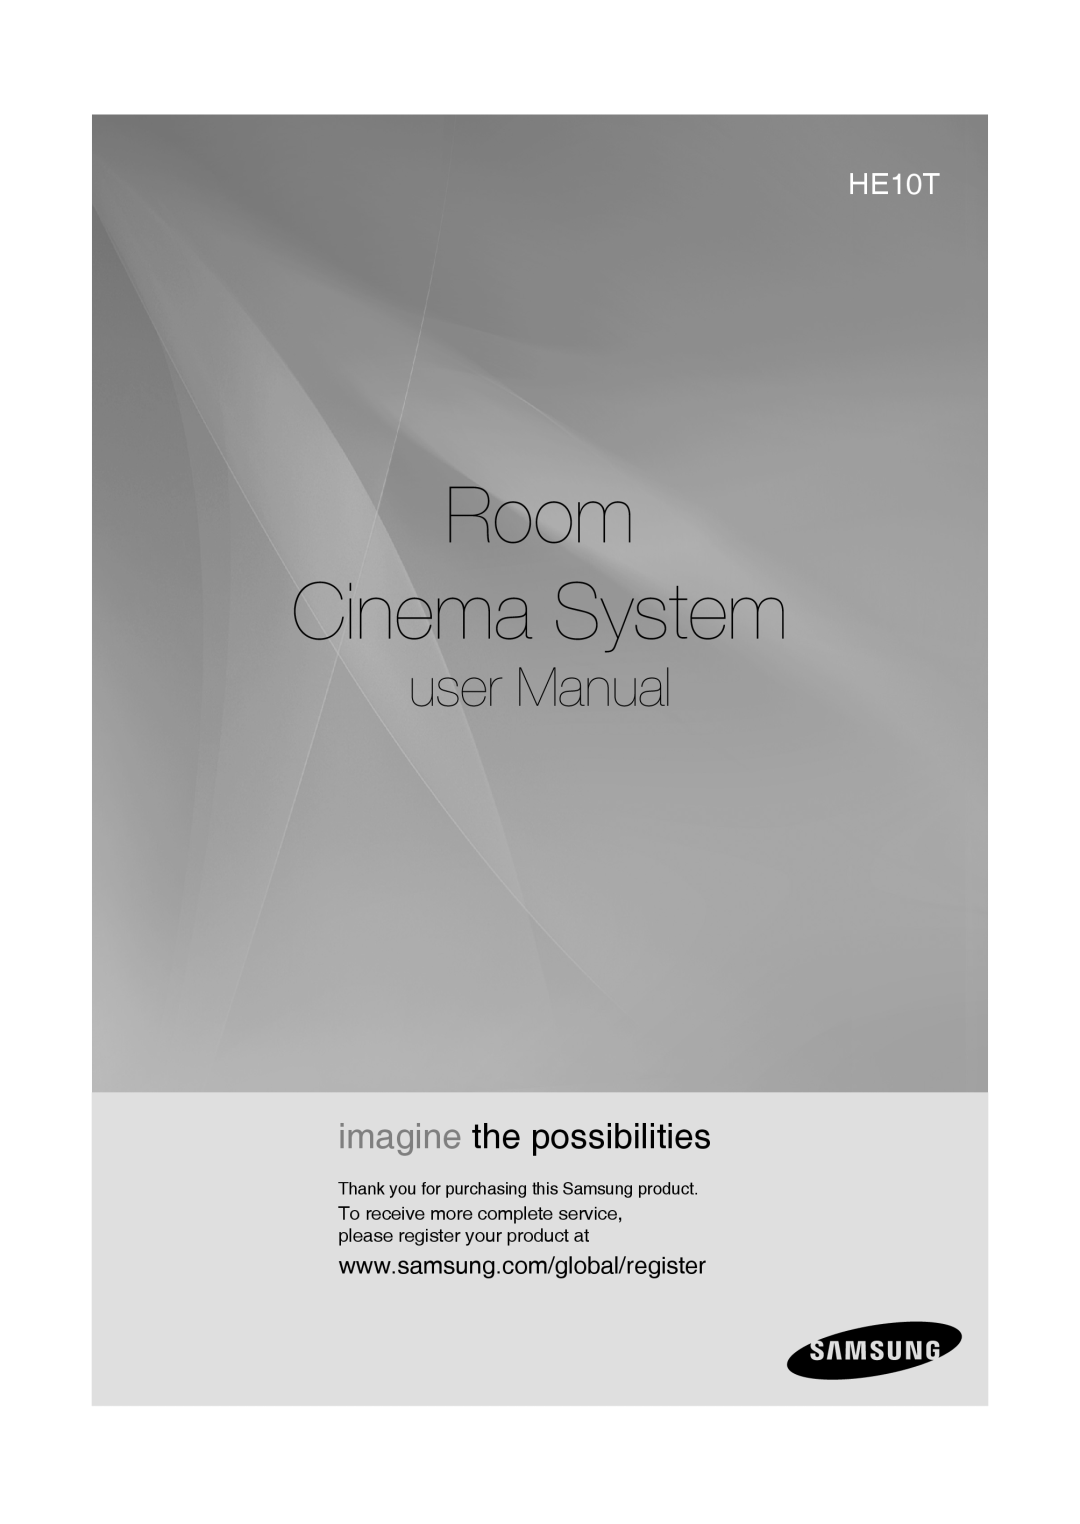 Samsung HE10T user manual Room Cinema System, imagine the possibilities 